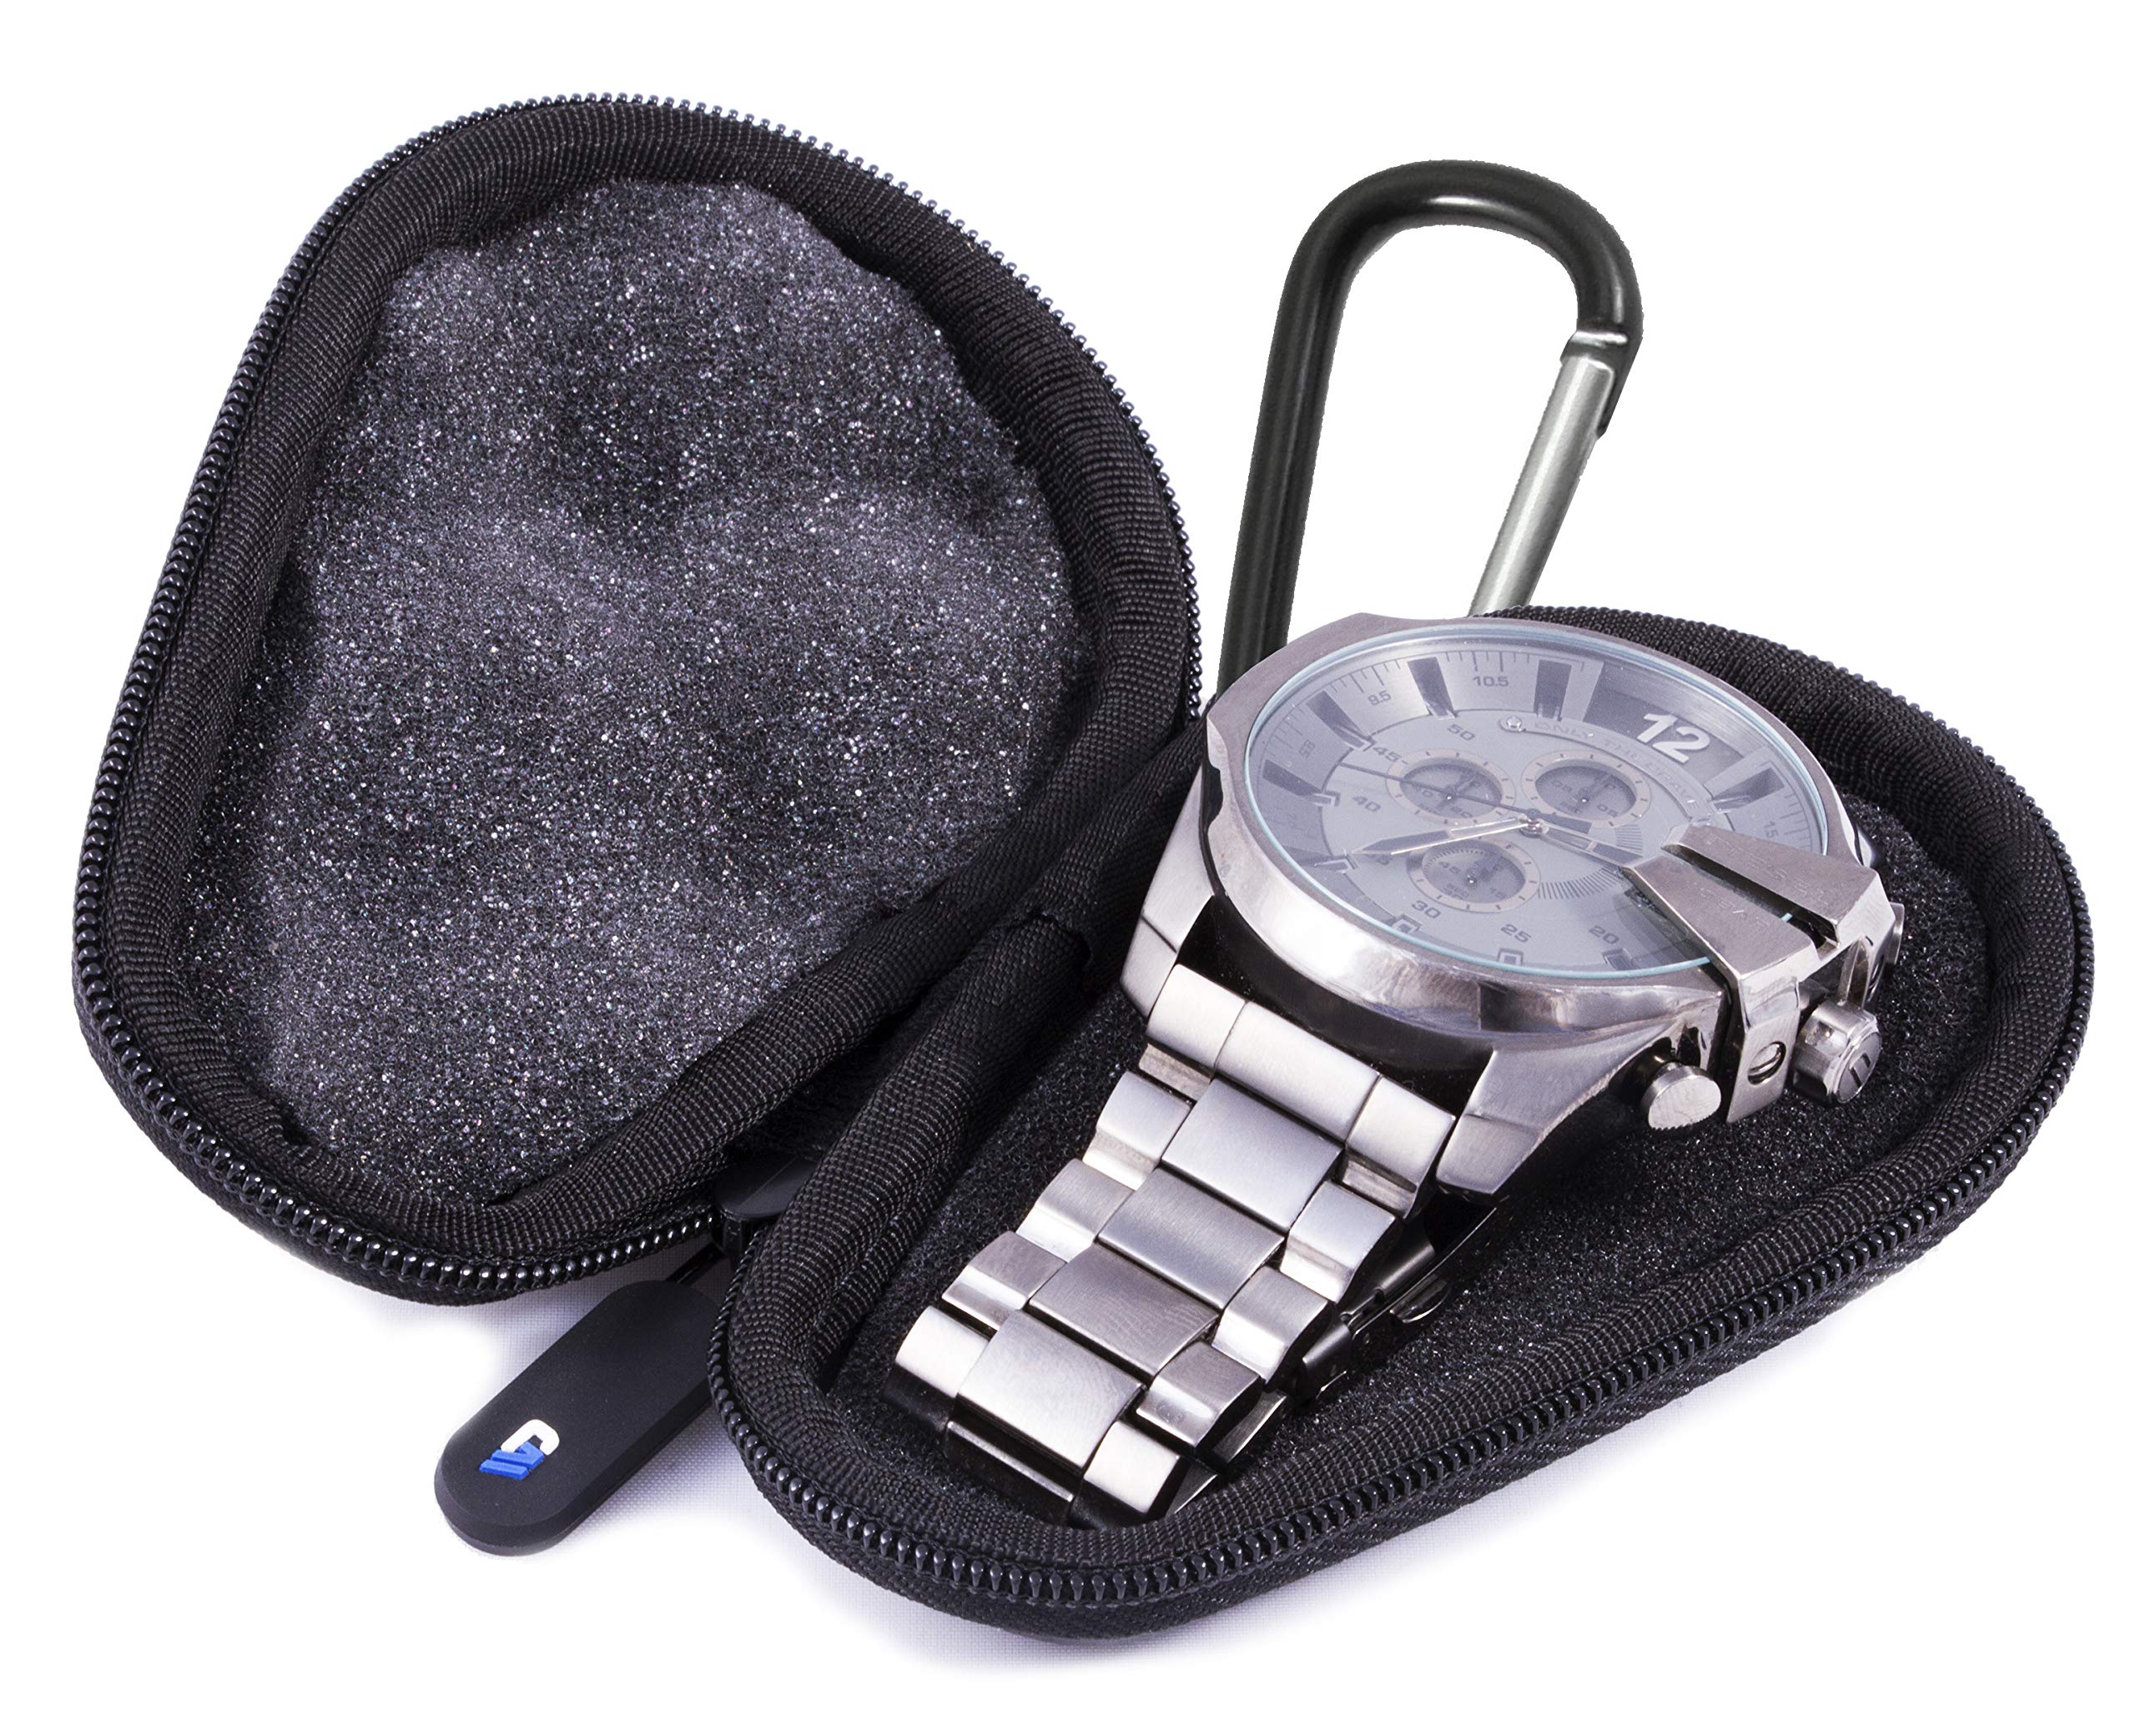 CASEMATIX Premium Travel Watch Case with Rugged Hard Shell Exterior, Foam Interior, Zipper & Metal Carabiner -Vintage Pattern Watch Travel Box for up to 56MM Watches